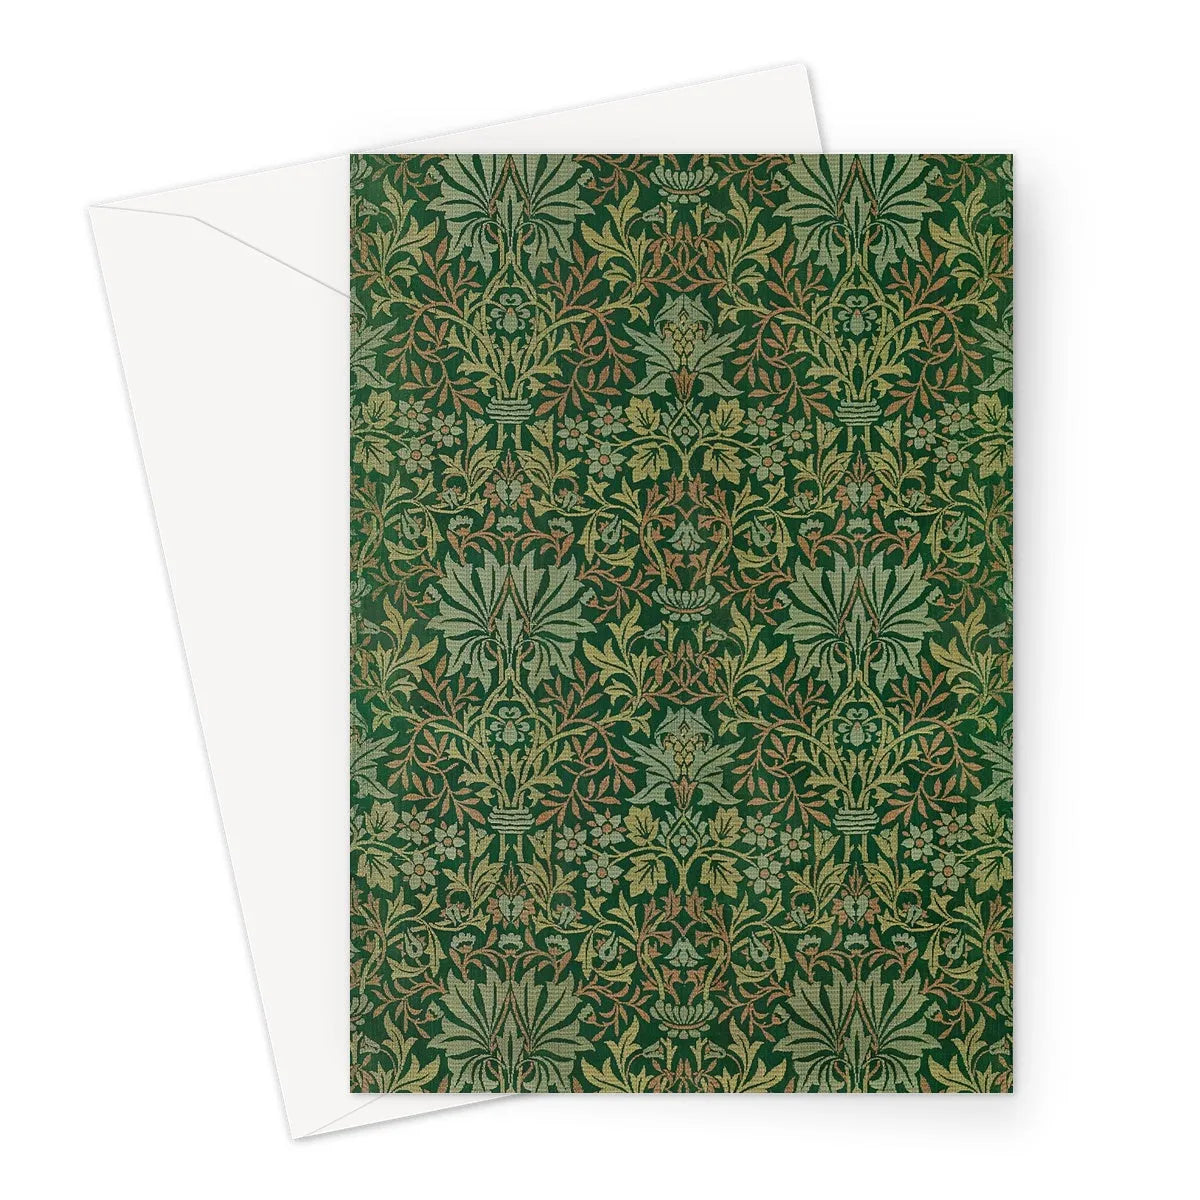 Flower Garden - William Morris Pattern Art Greeting Card - A5 Portrait / 1 Card - Greeting & Note Cards - Aesthetic Art